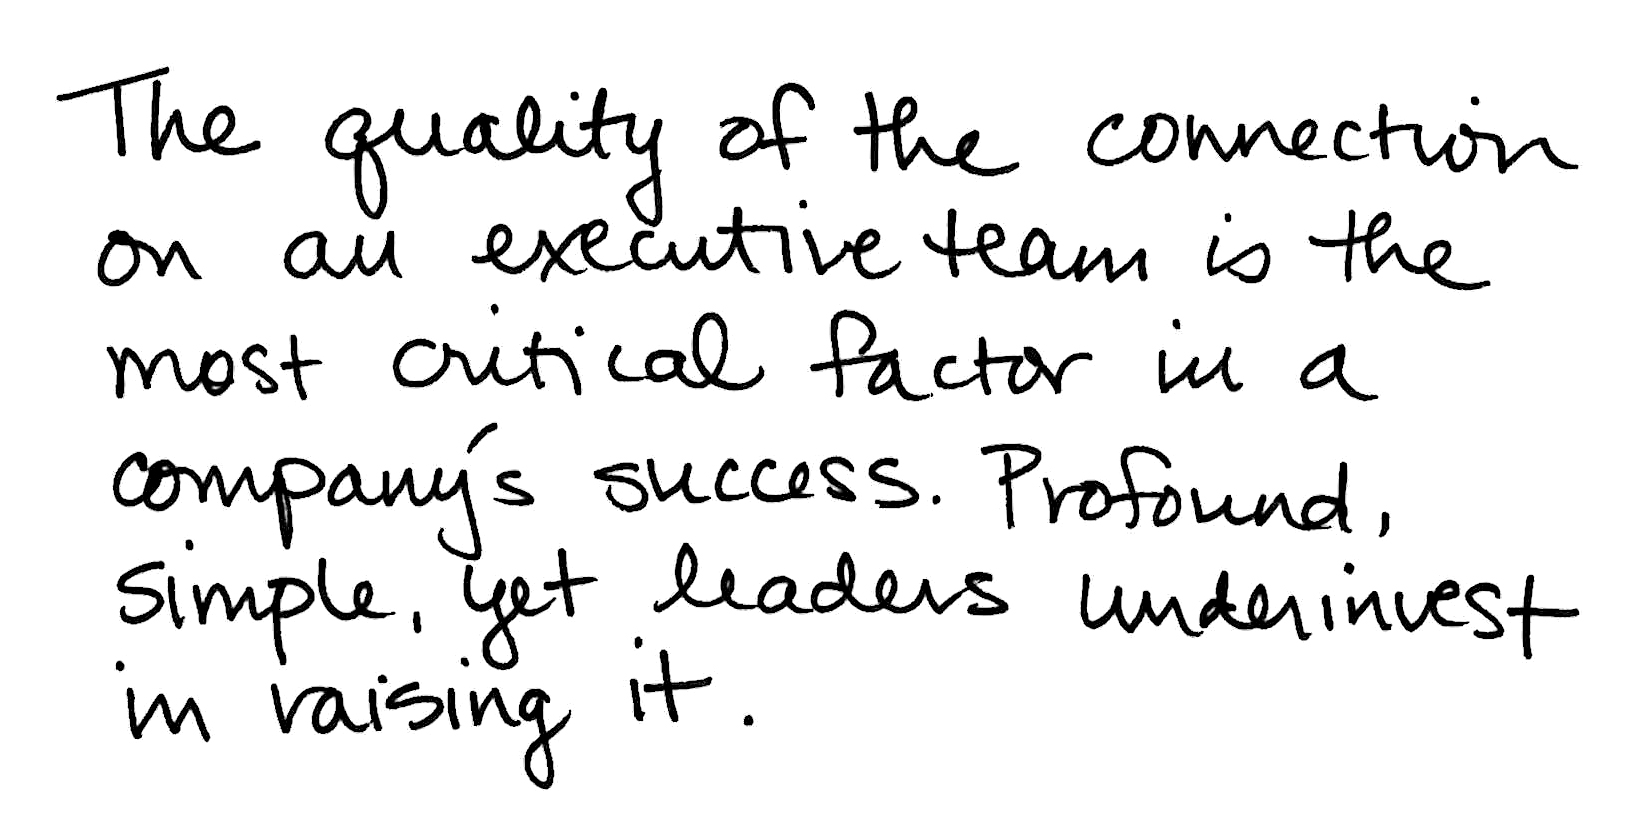 The quality of the connection on an executive team is the most critical factor in a company's success. Profound, simple, yet leaders underinvest in raising it.